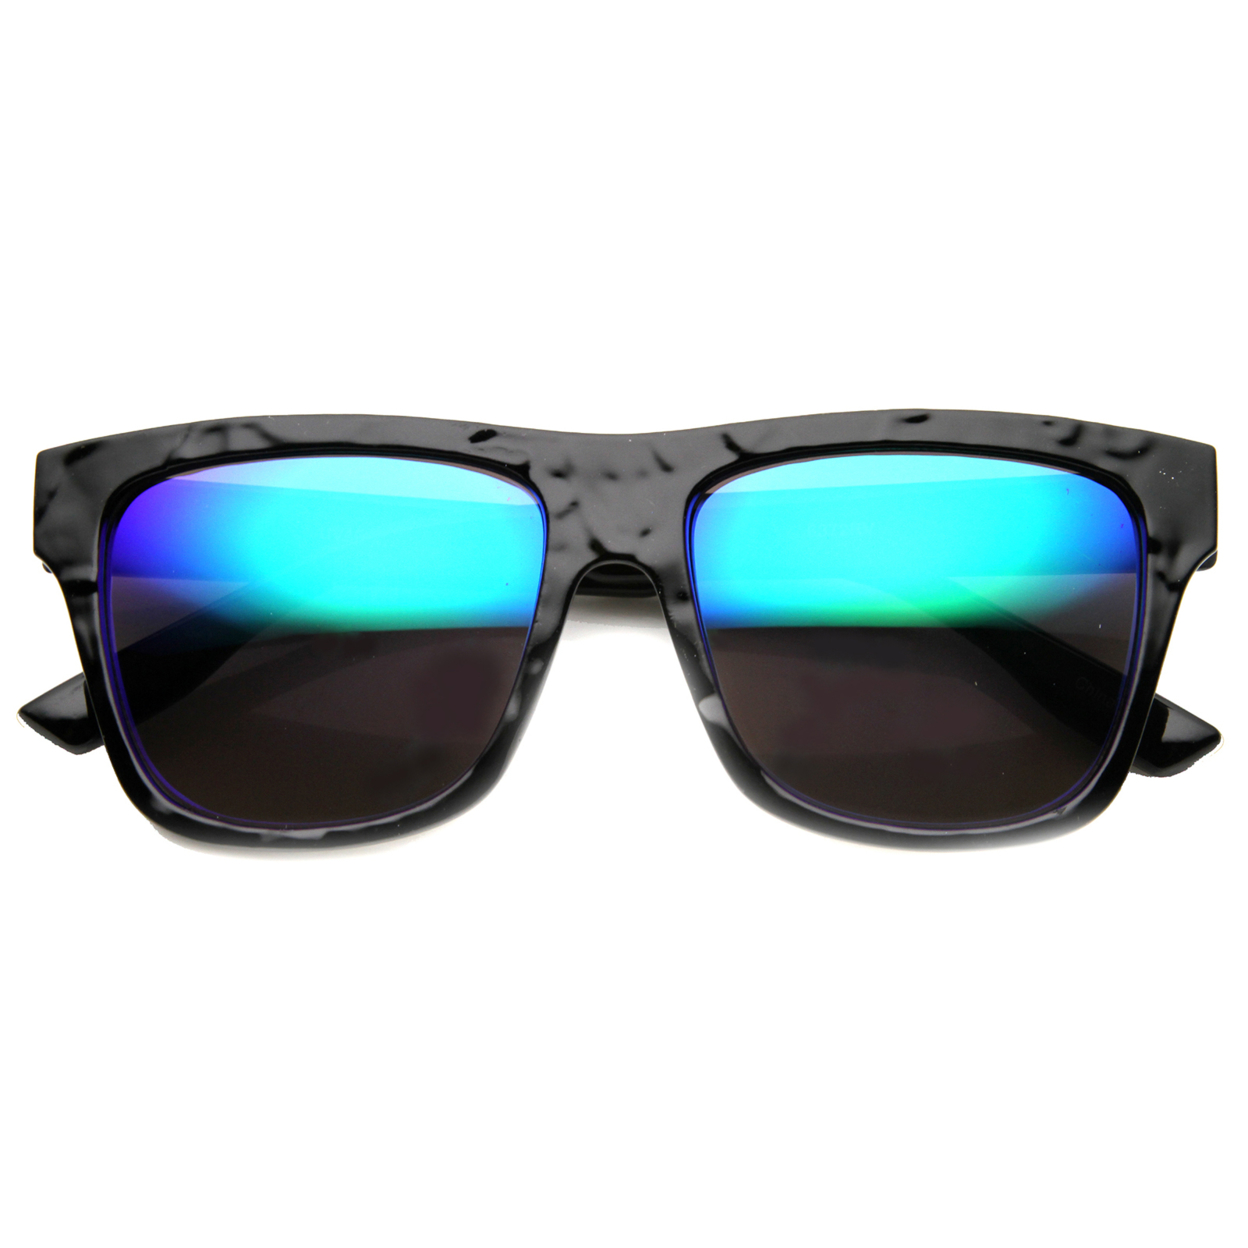 Unisex Horn Rimmed Sunglasses With UV400 Protected Mirrored Lens 9864 - Shiny-Black / Midnight